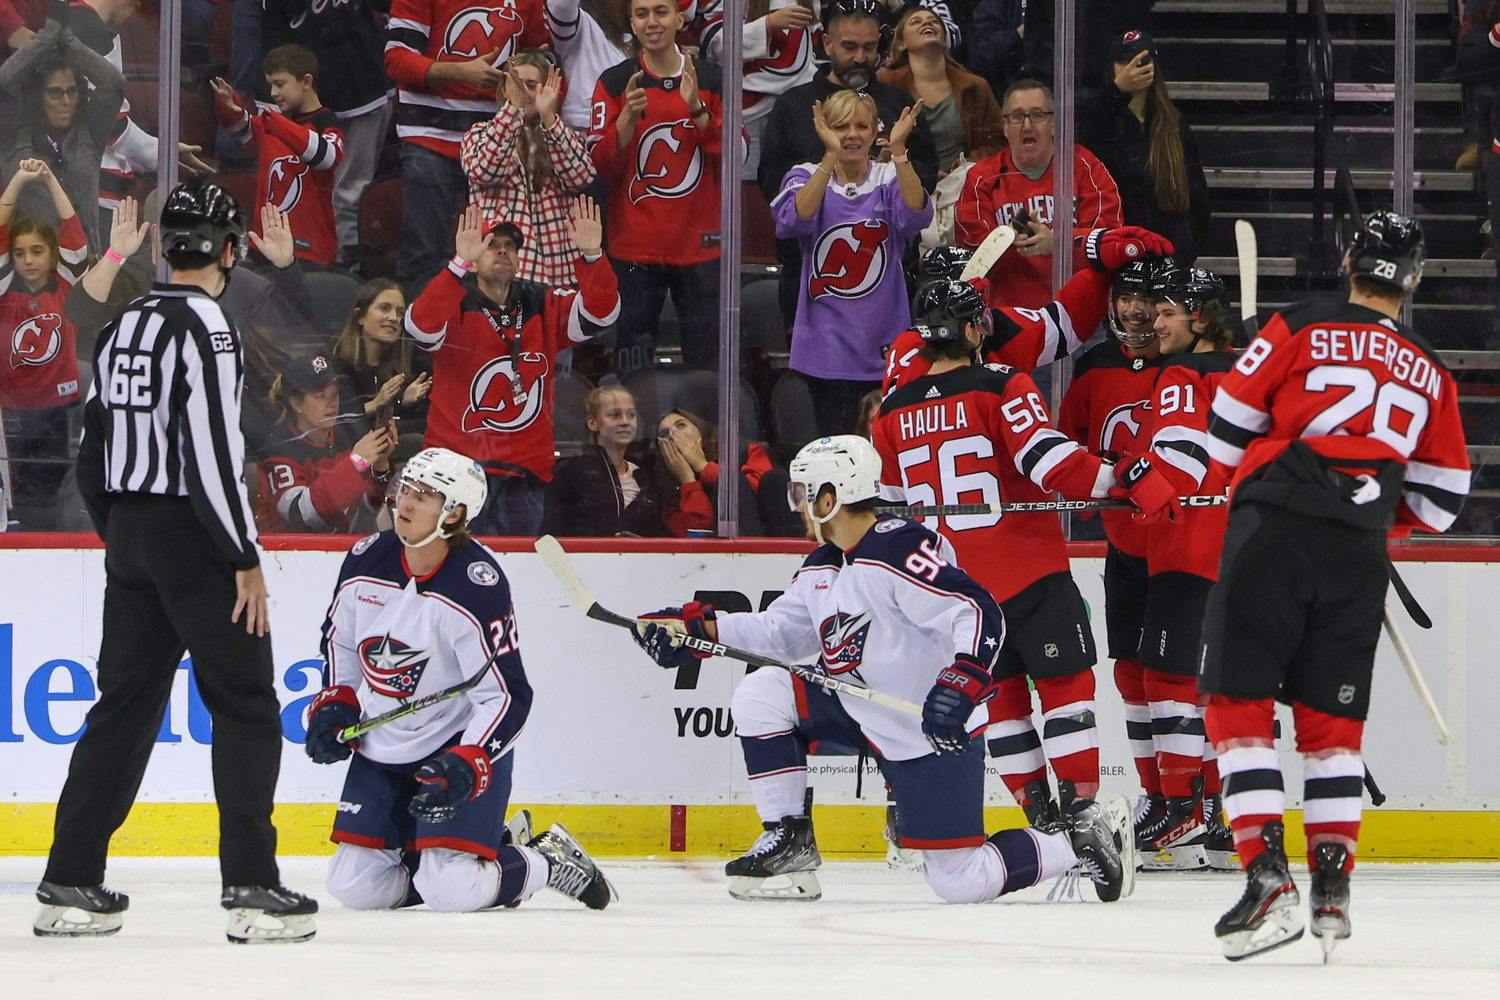 Devils beat Flyers for team-record 11th straight road win - The